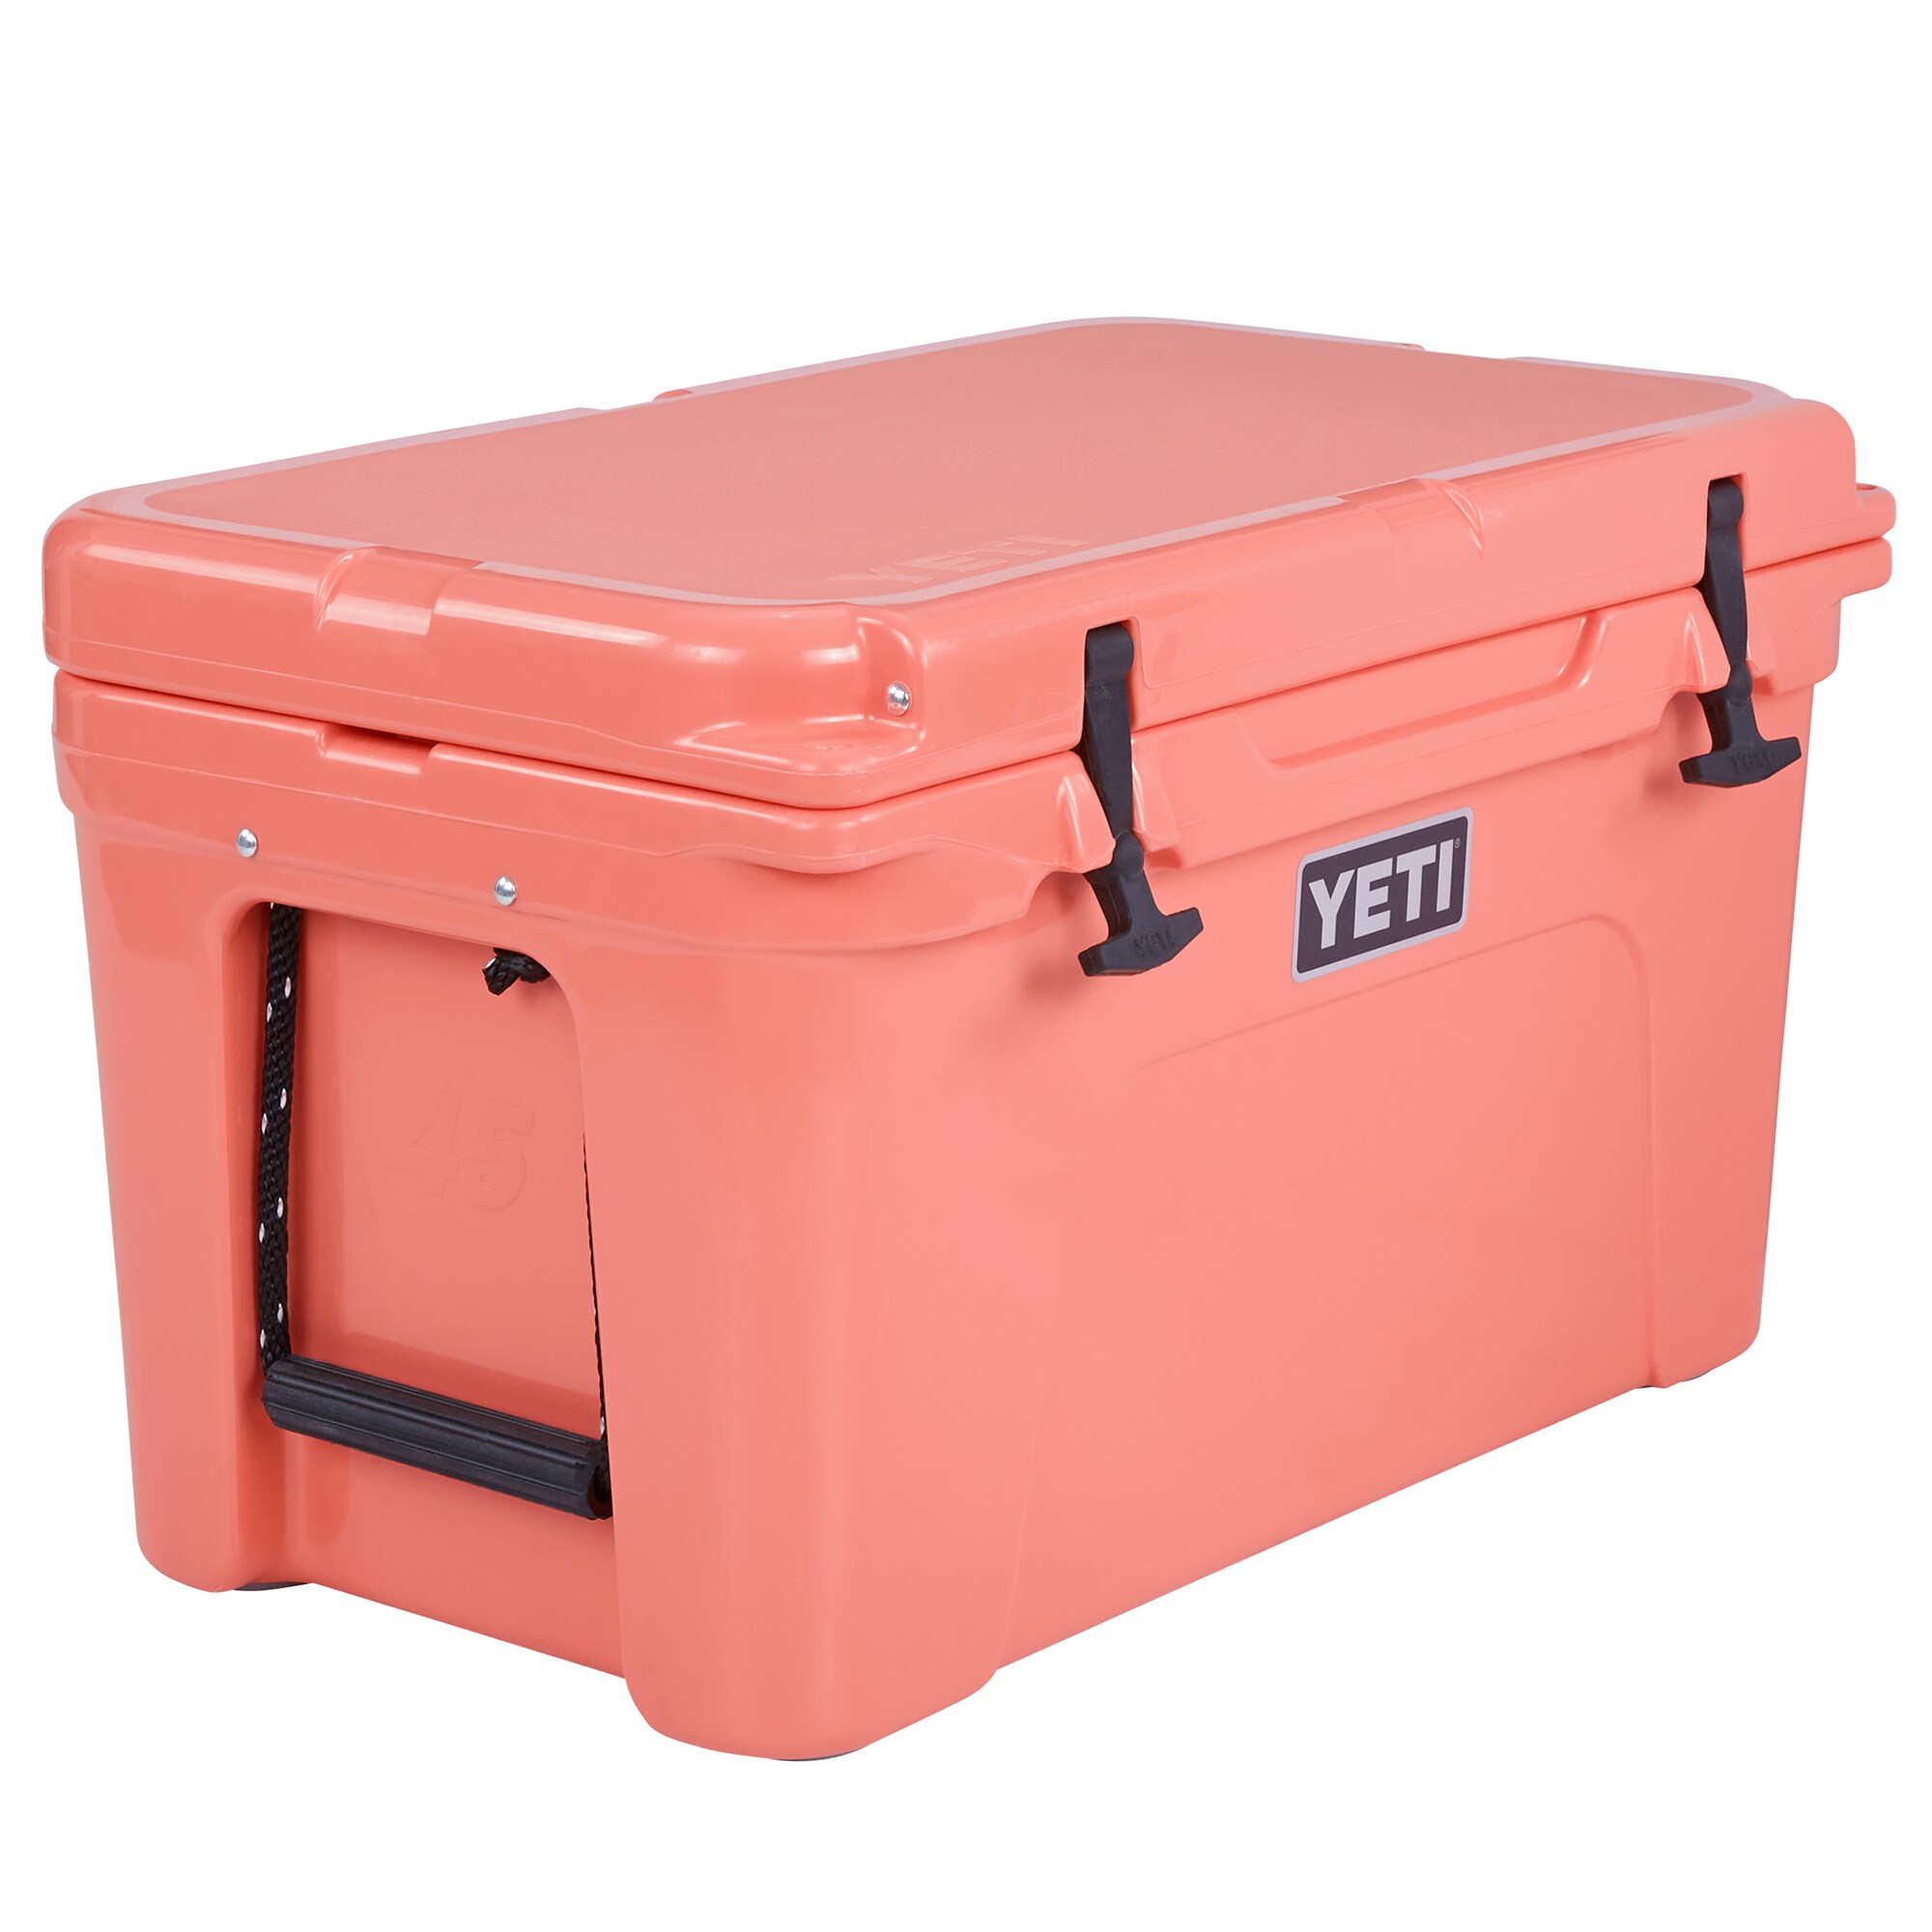 YETI Tundra 45 Insulated Chest Cooler, Coral at